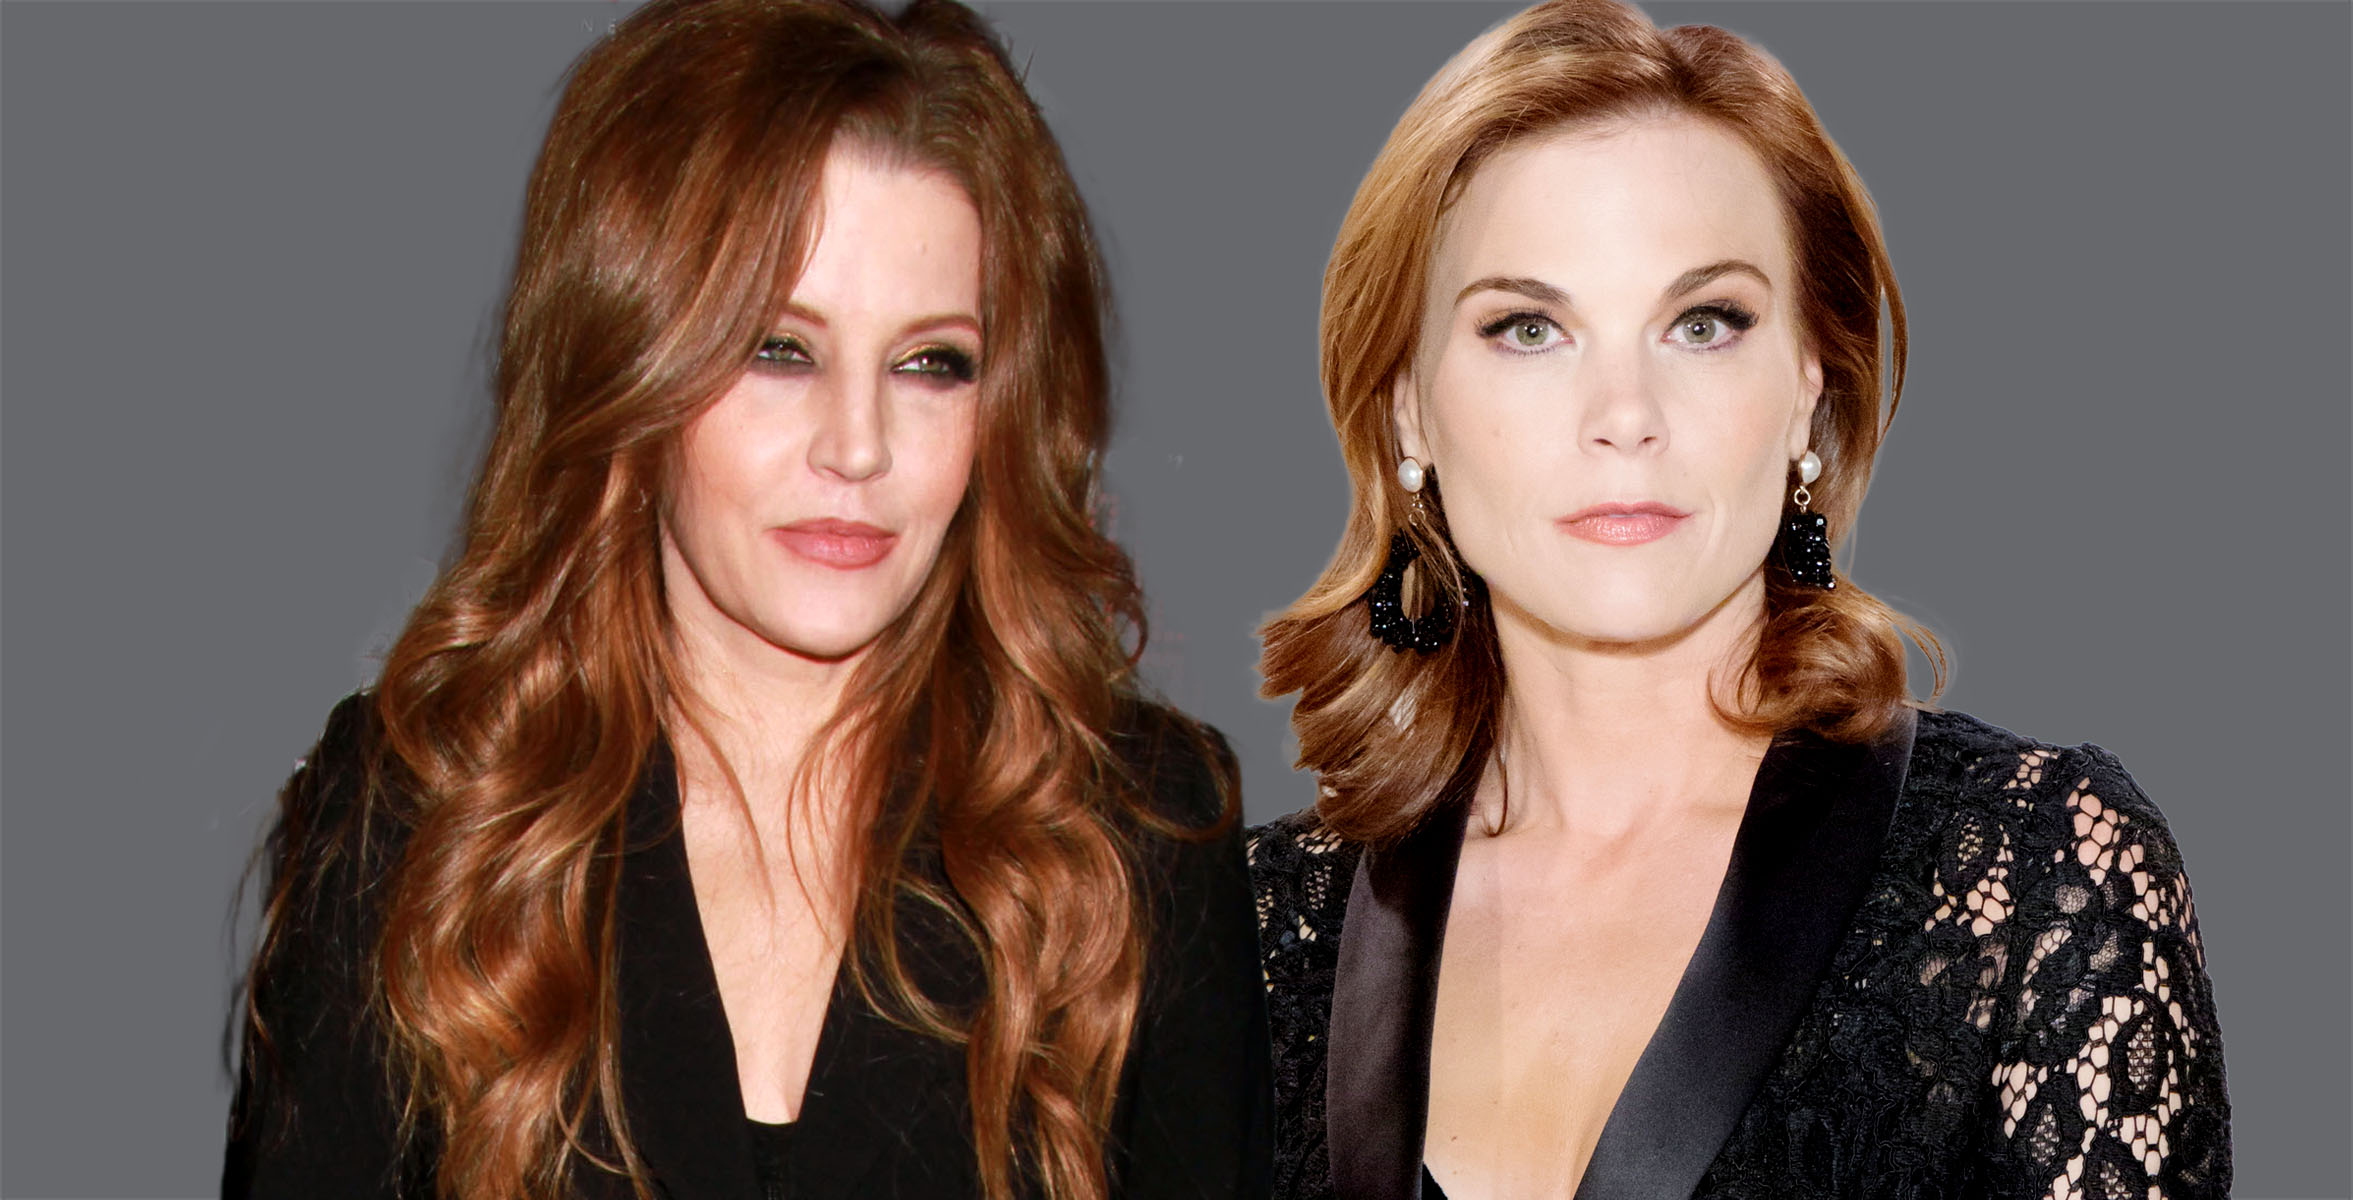 lisa marie present wearing black and gina tognoni wearing black on a gray background